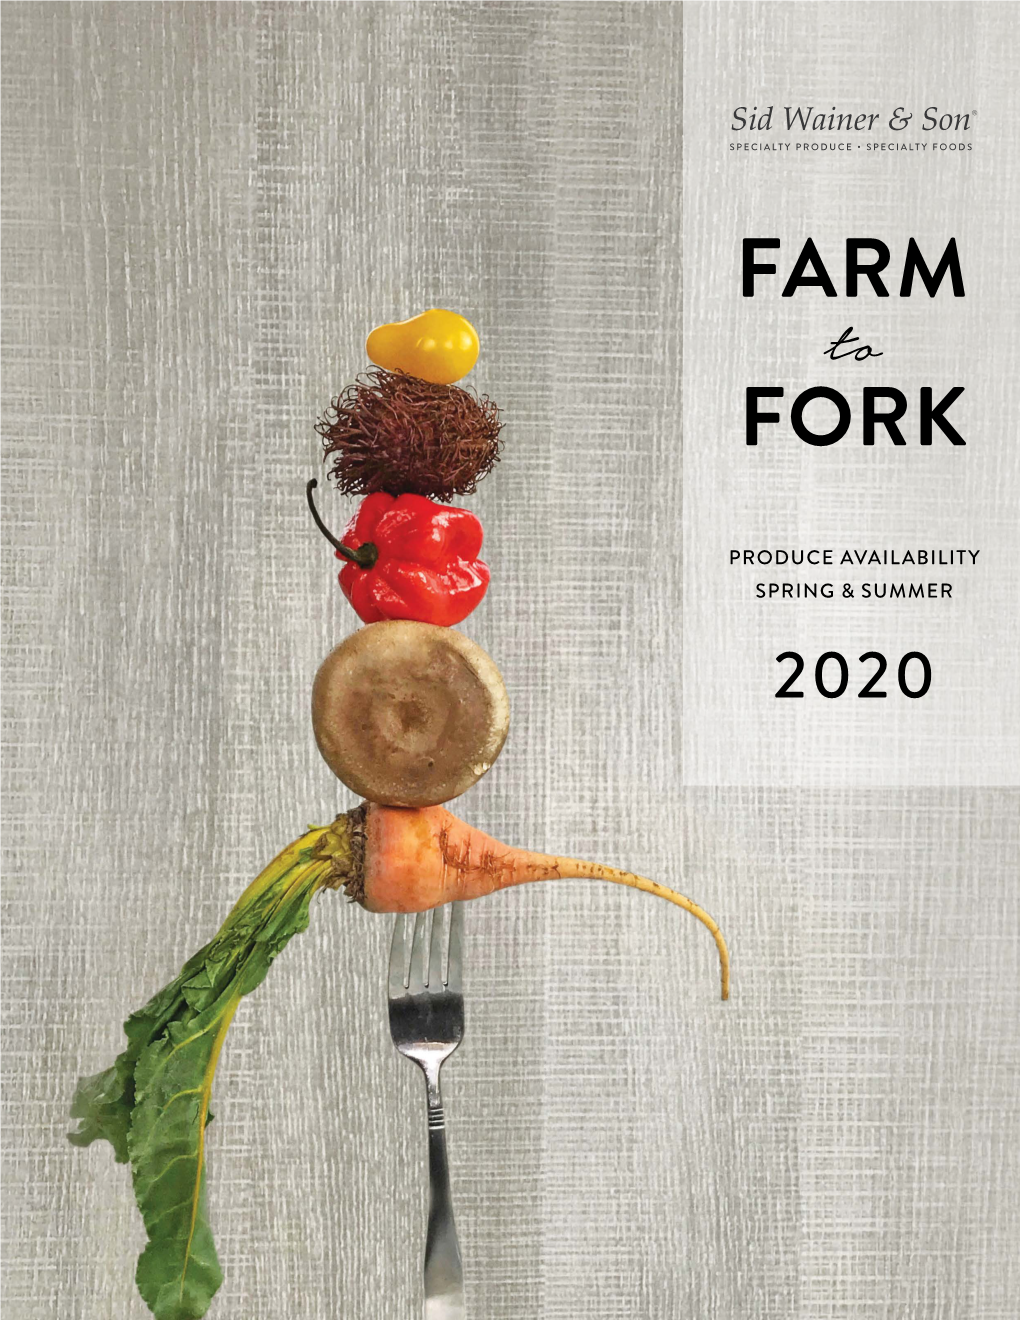 FARM to FORK